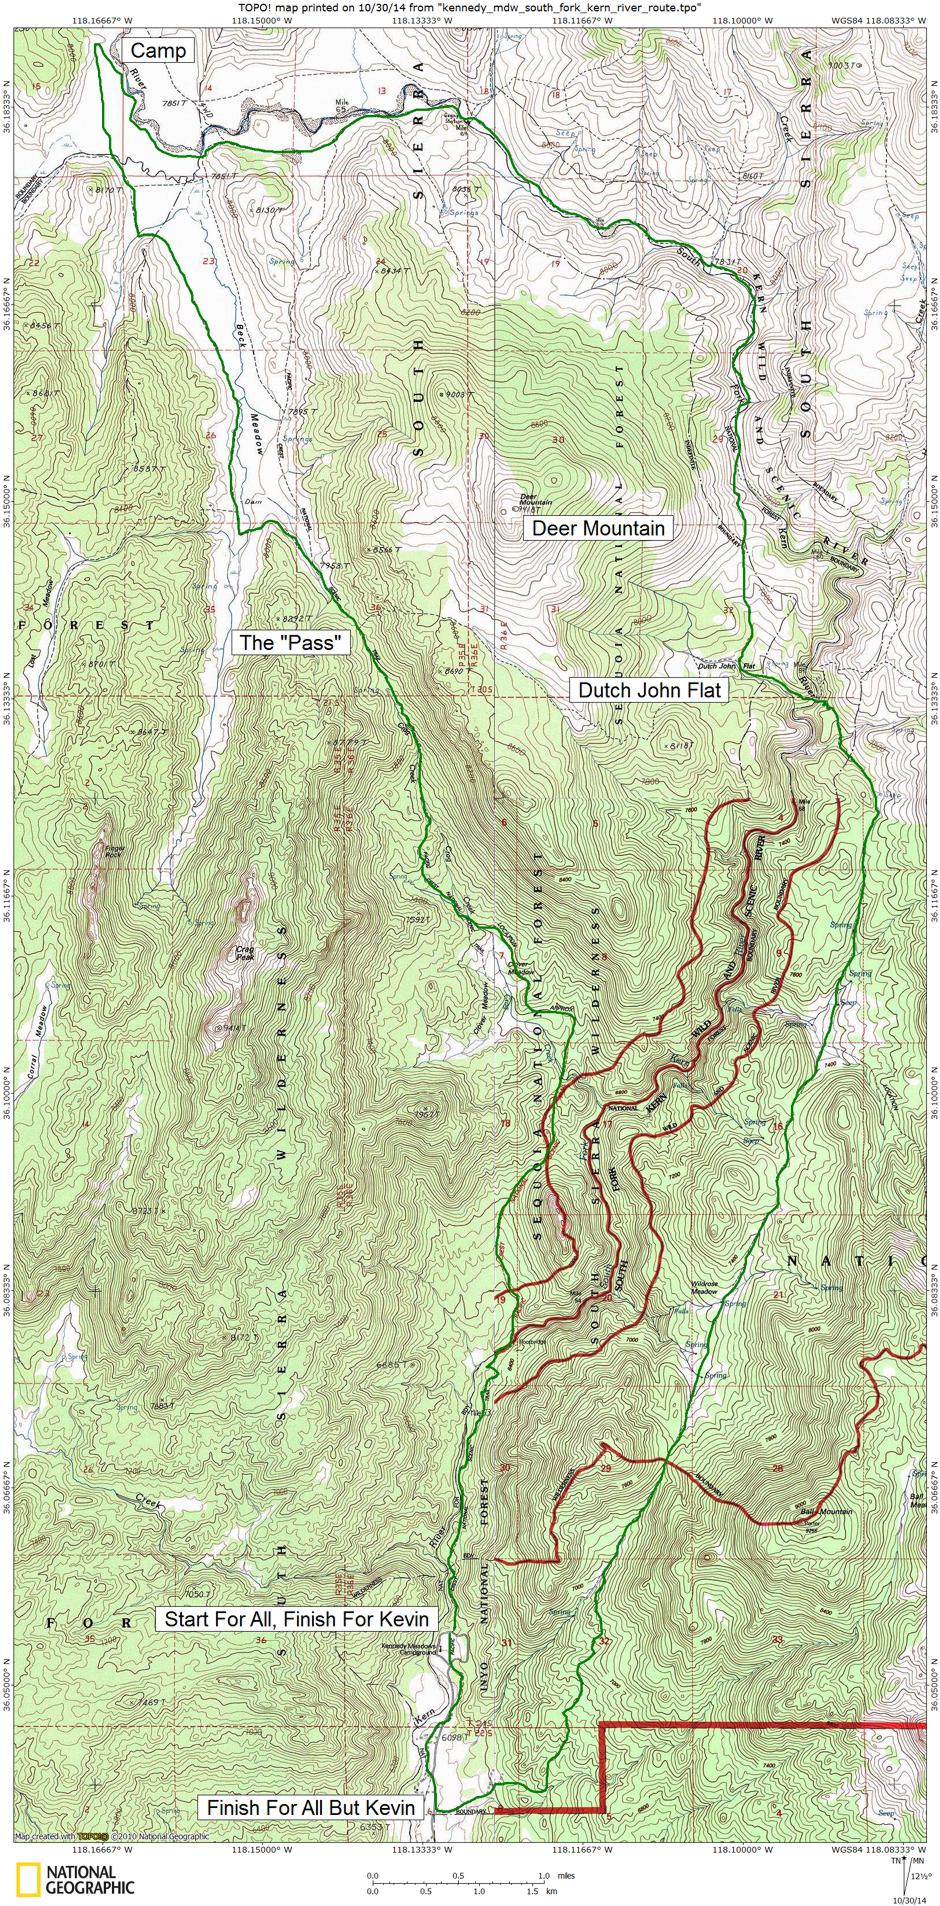 Kennedy Meadows-South Fork Kern River Loop Route Map